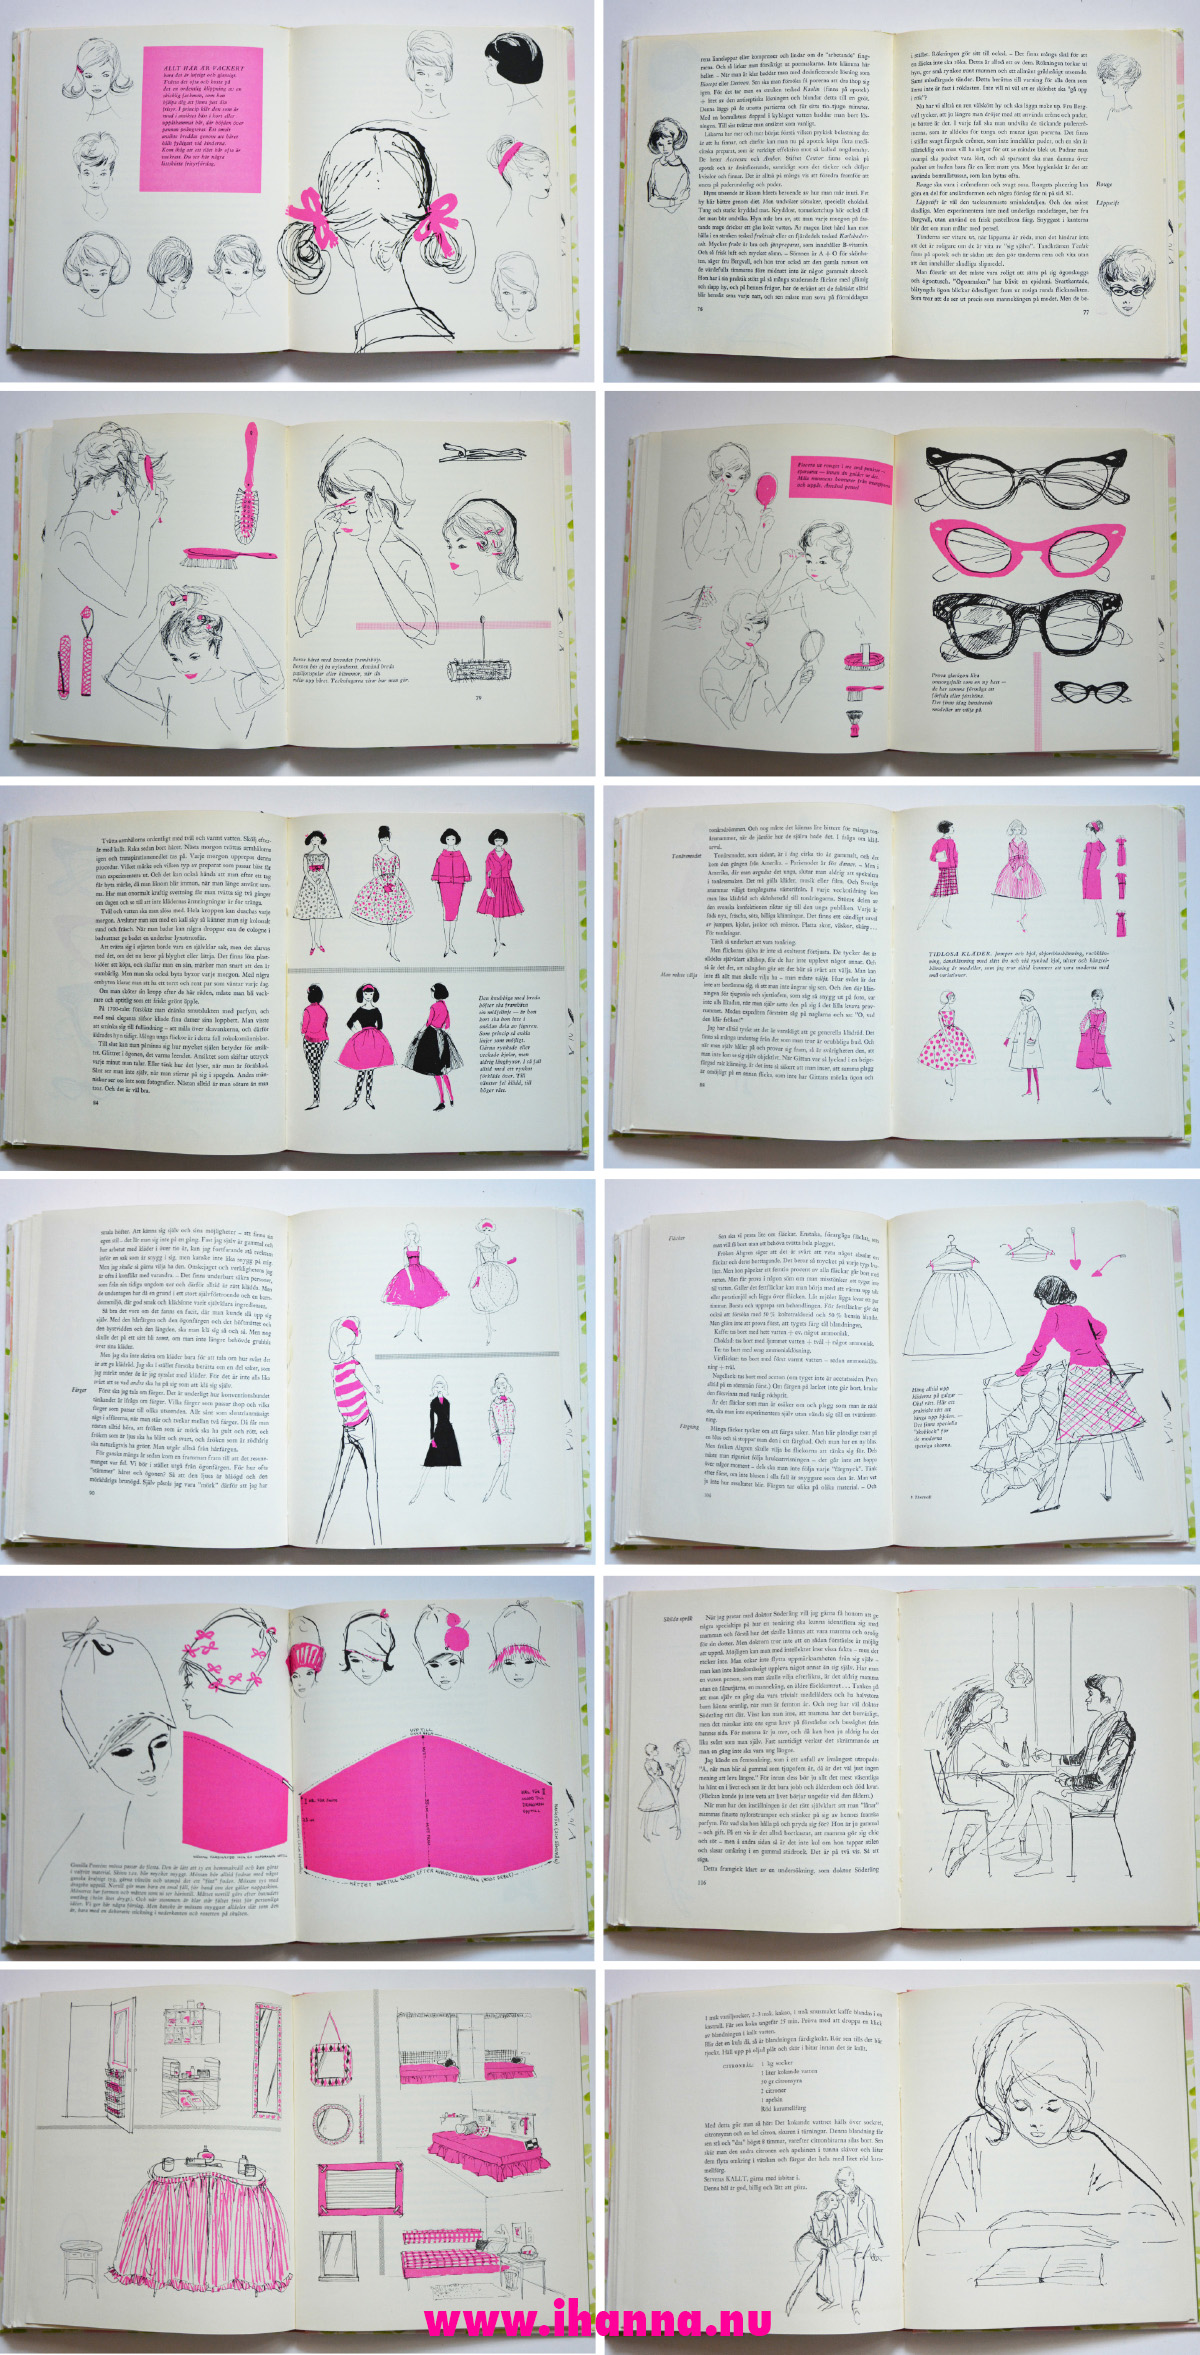 Examples of the cute illustrations in Kerstin Thorvall's book The book for you (Boken till dig) #sweden